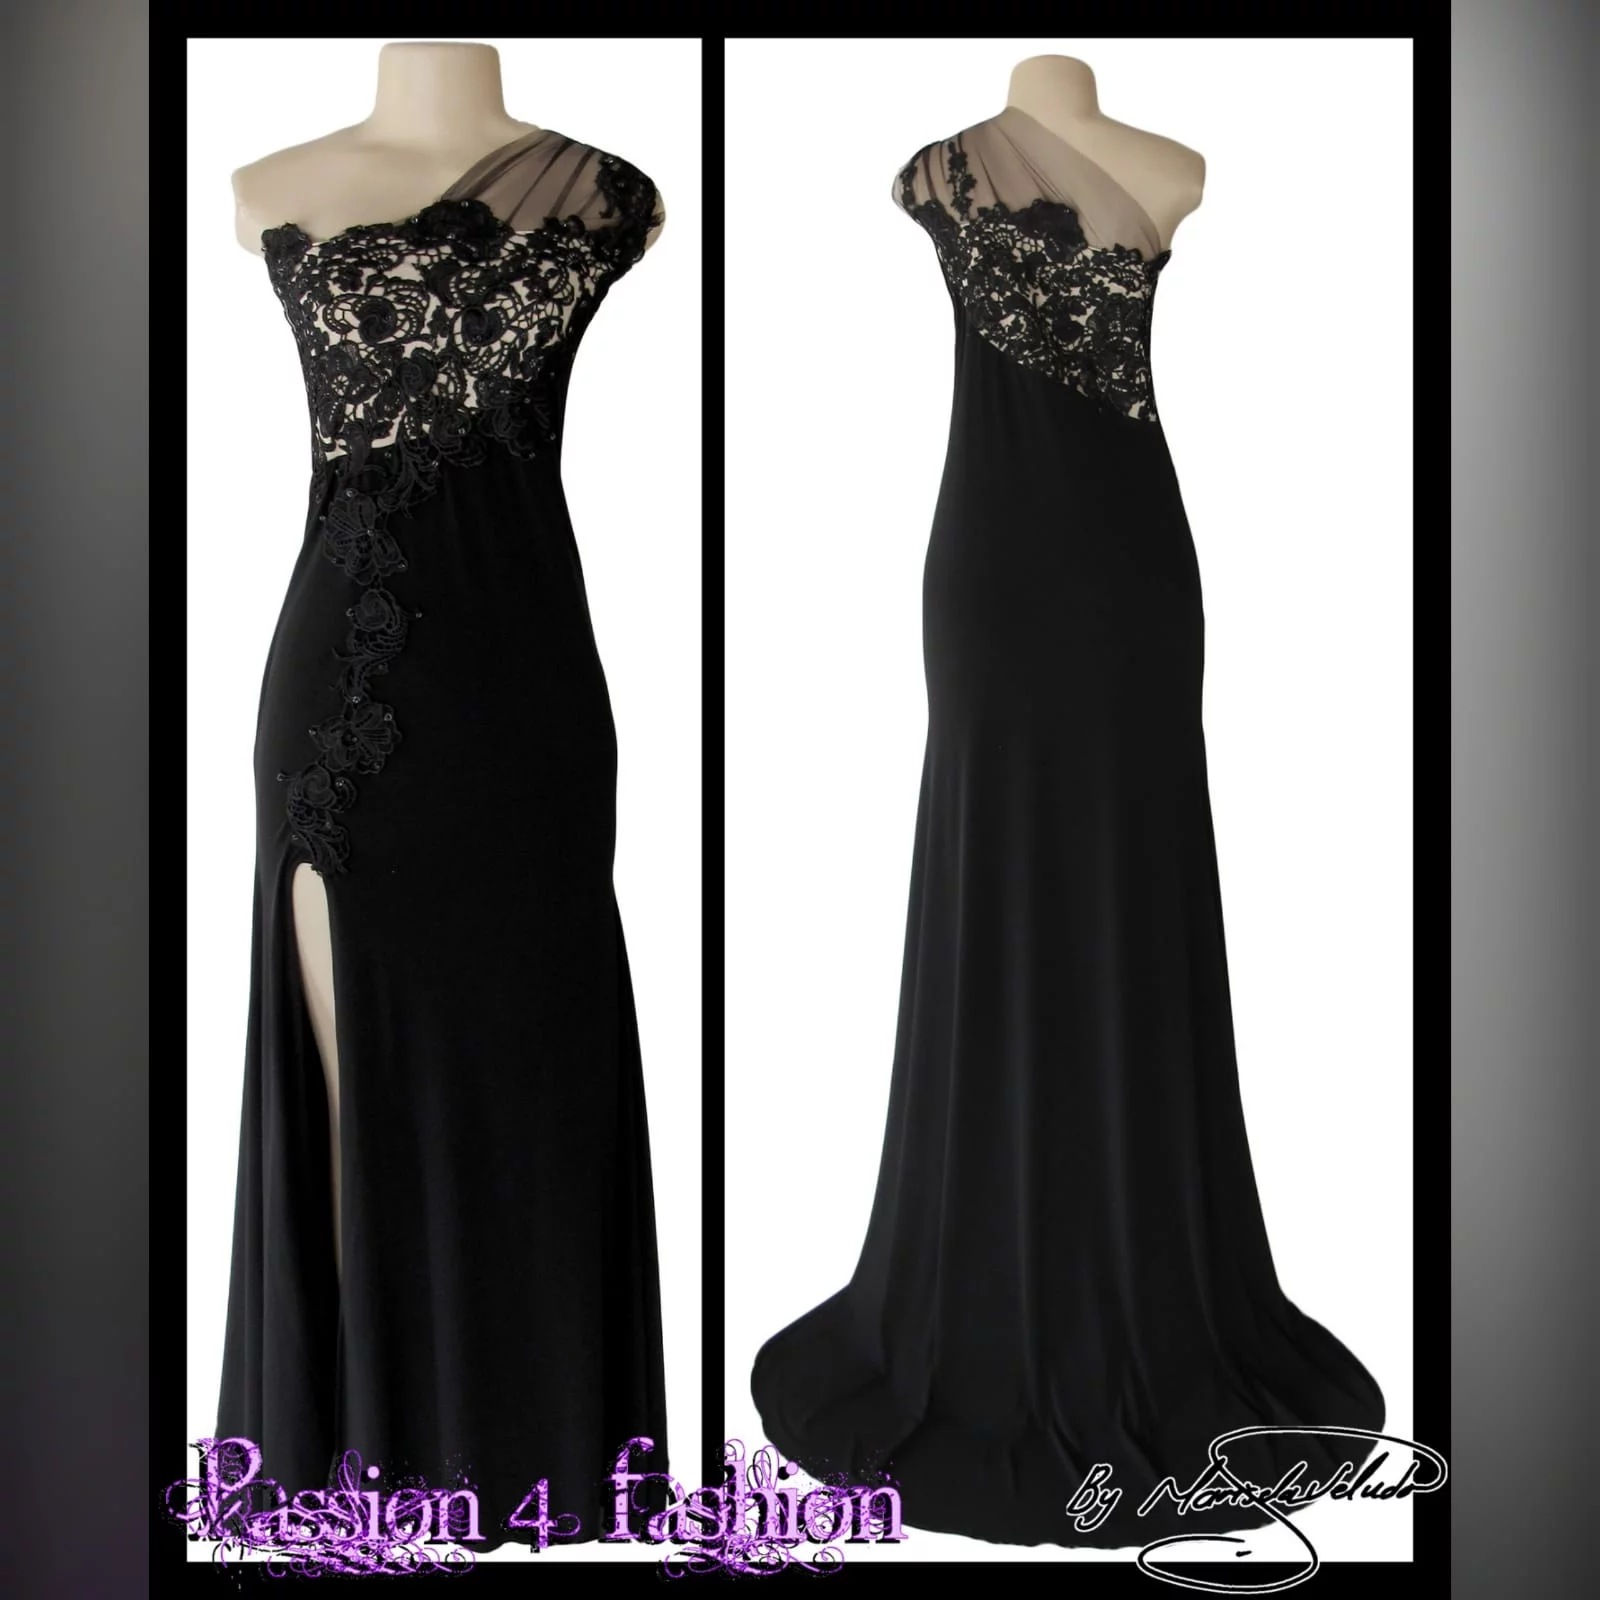 Long black evening dress with lace 3 single shoulder, lace bodice long black evening dress. With a slit and a train